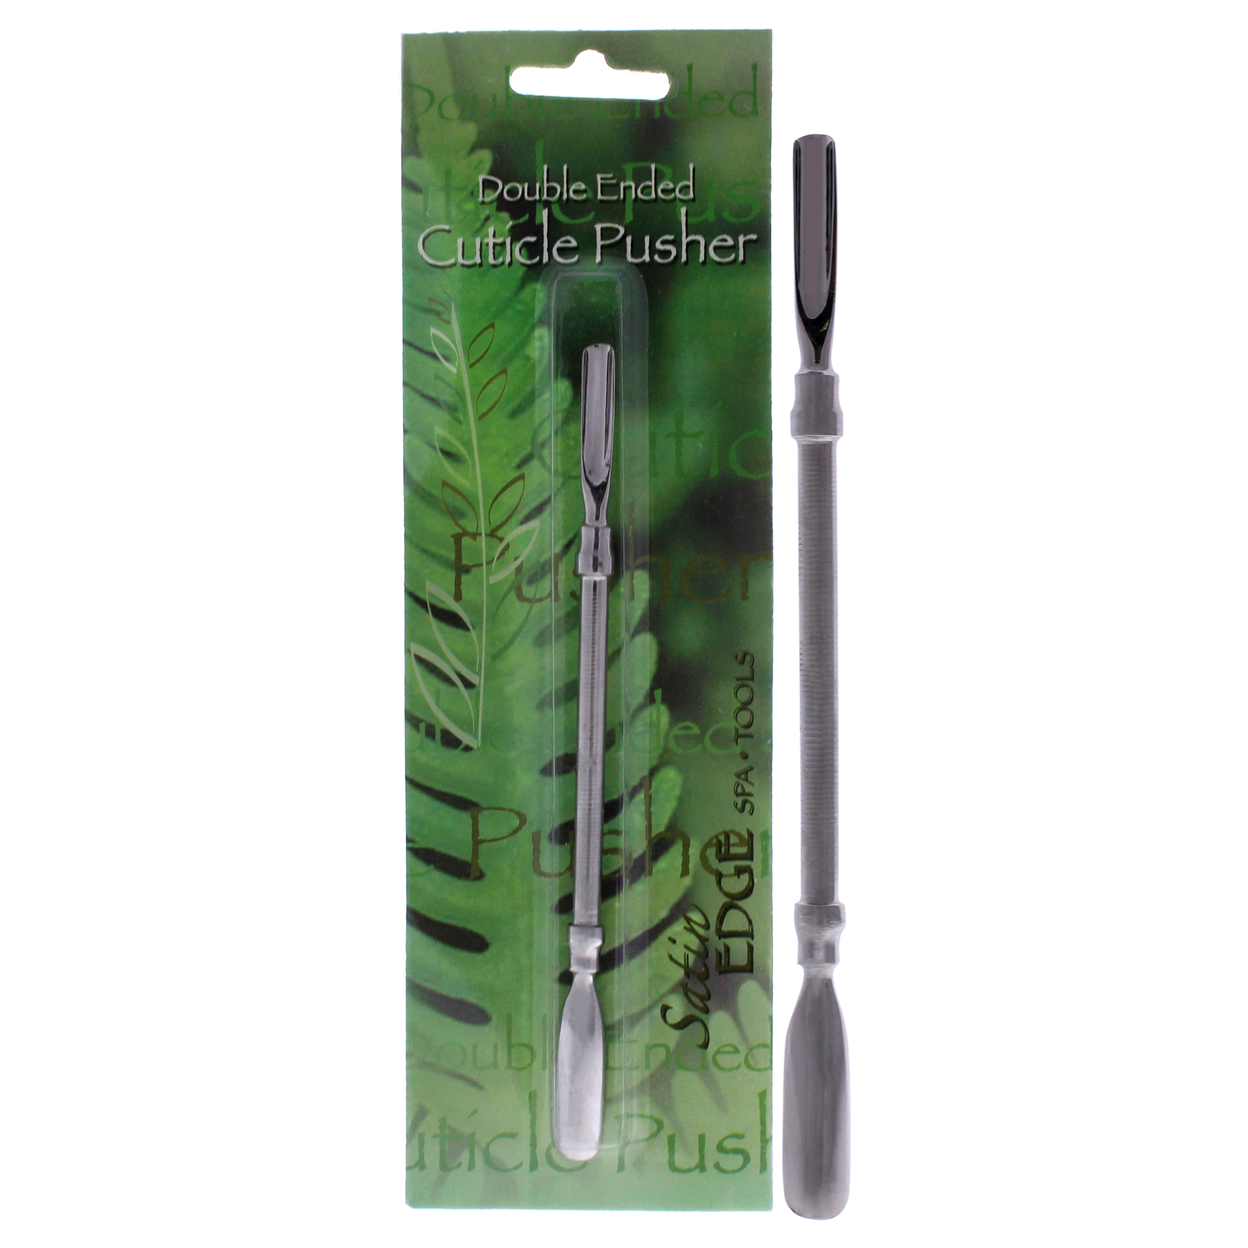 Satin Edge Double-Ended Cuticle Pusher 1 Pc